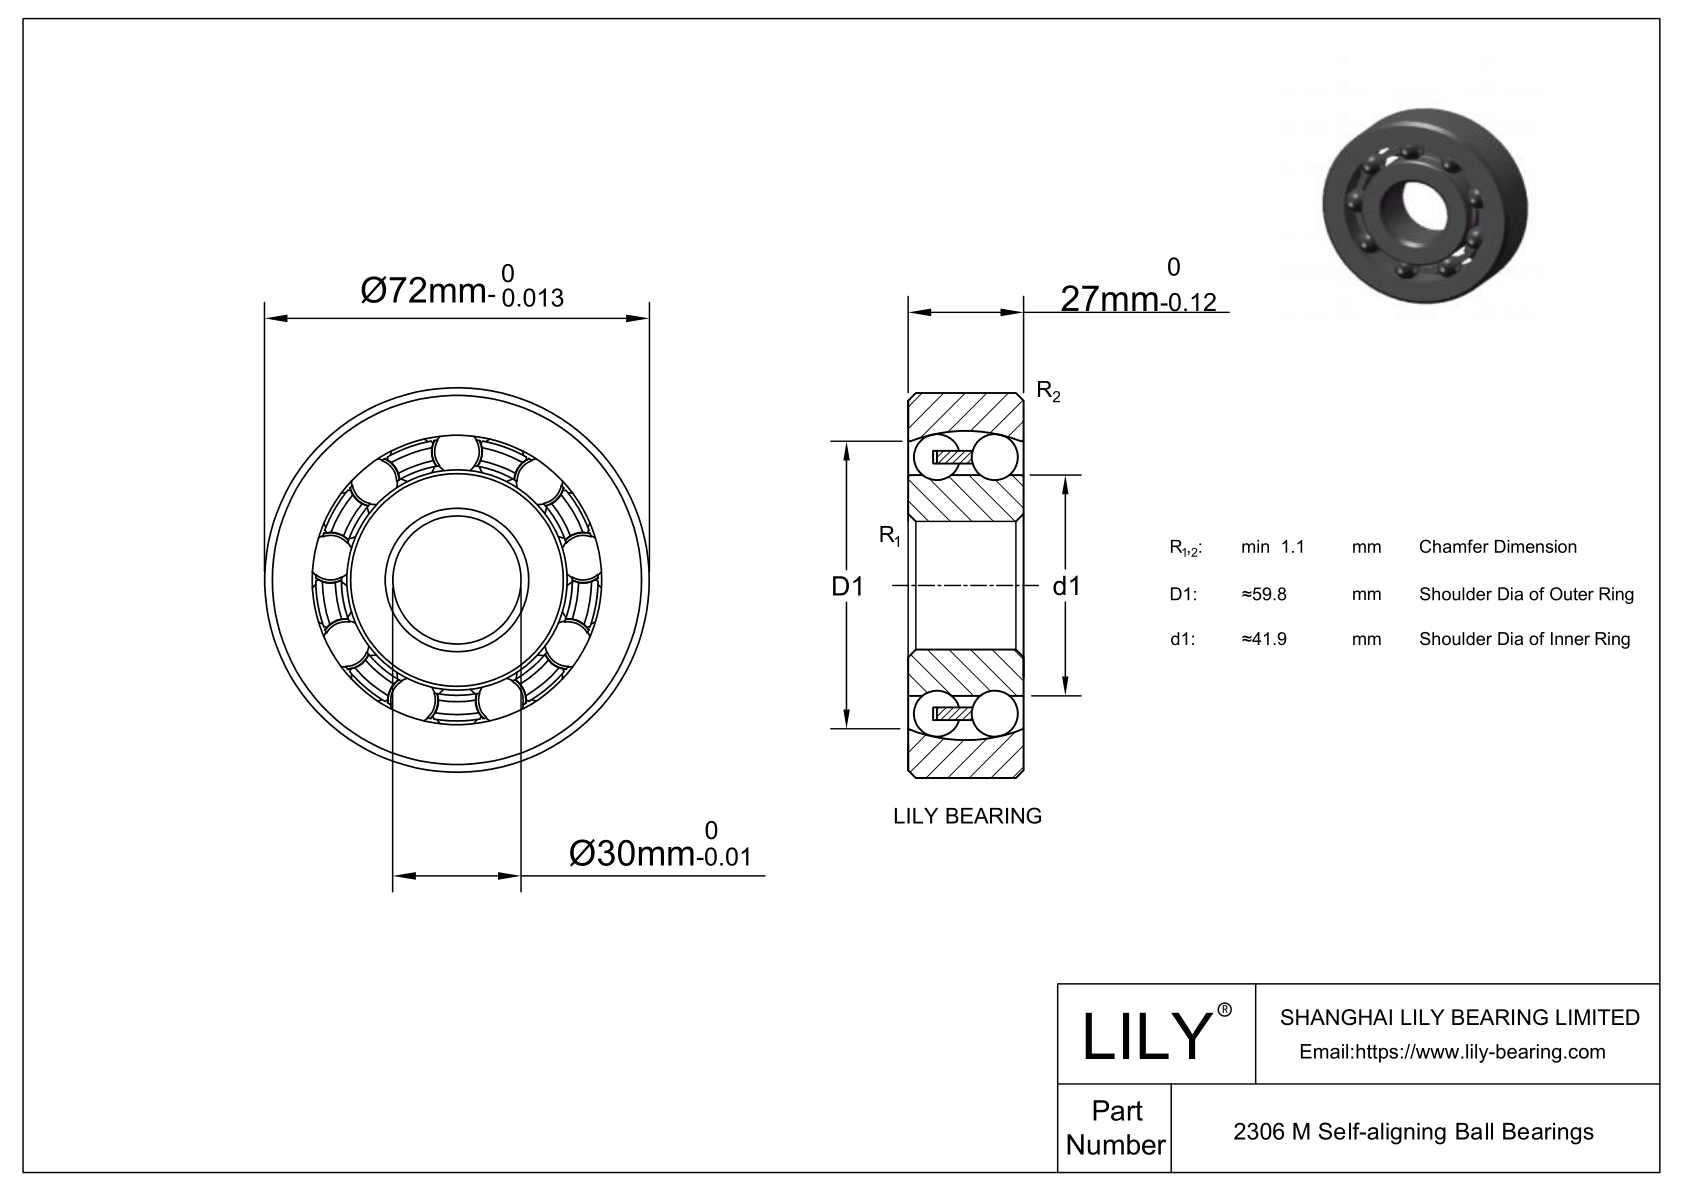 S2306 M Stainless Steel Self Aligning Ball Bearings cad drawing